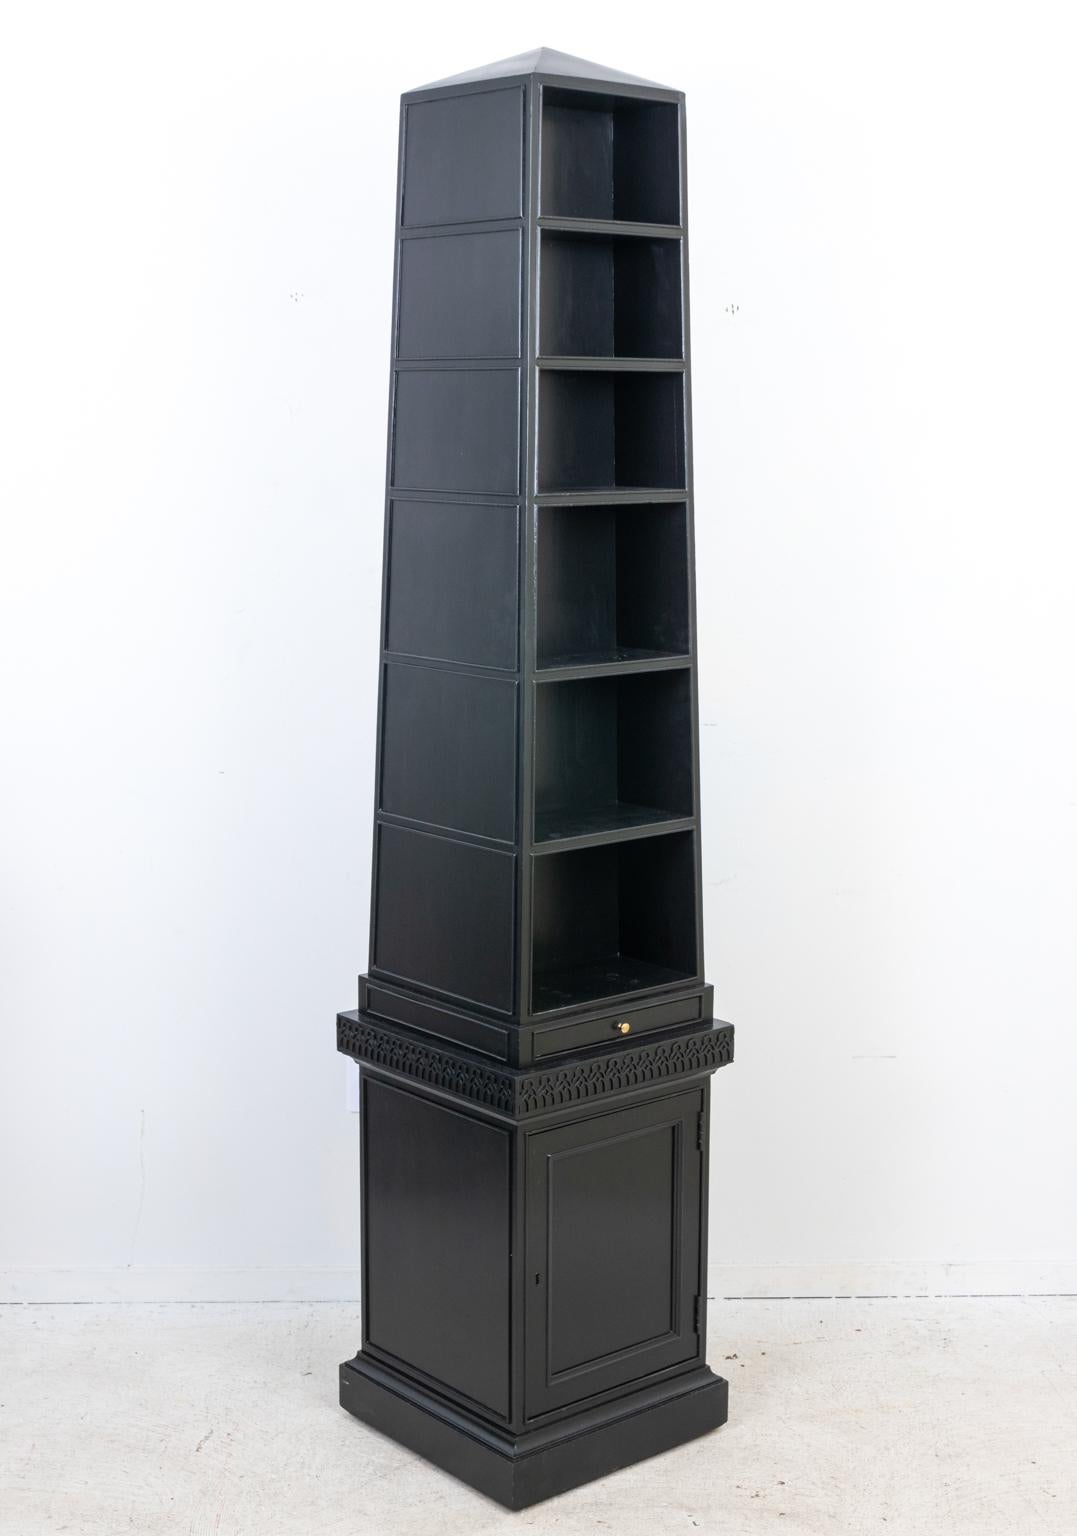 Circa 1980s pyramid or obelisk form bookcase by Baker Furniture with six shelves on the front and back. The piece also features a bottom cabinet with working key, single pull out drawer at the base of the obelisk, and fretwork detail on moldings.